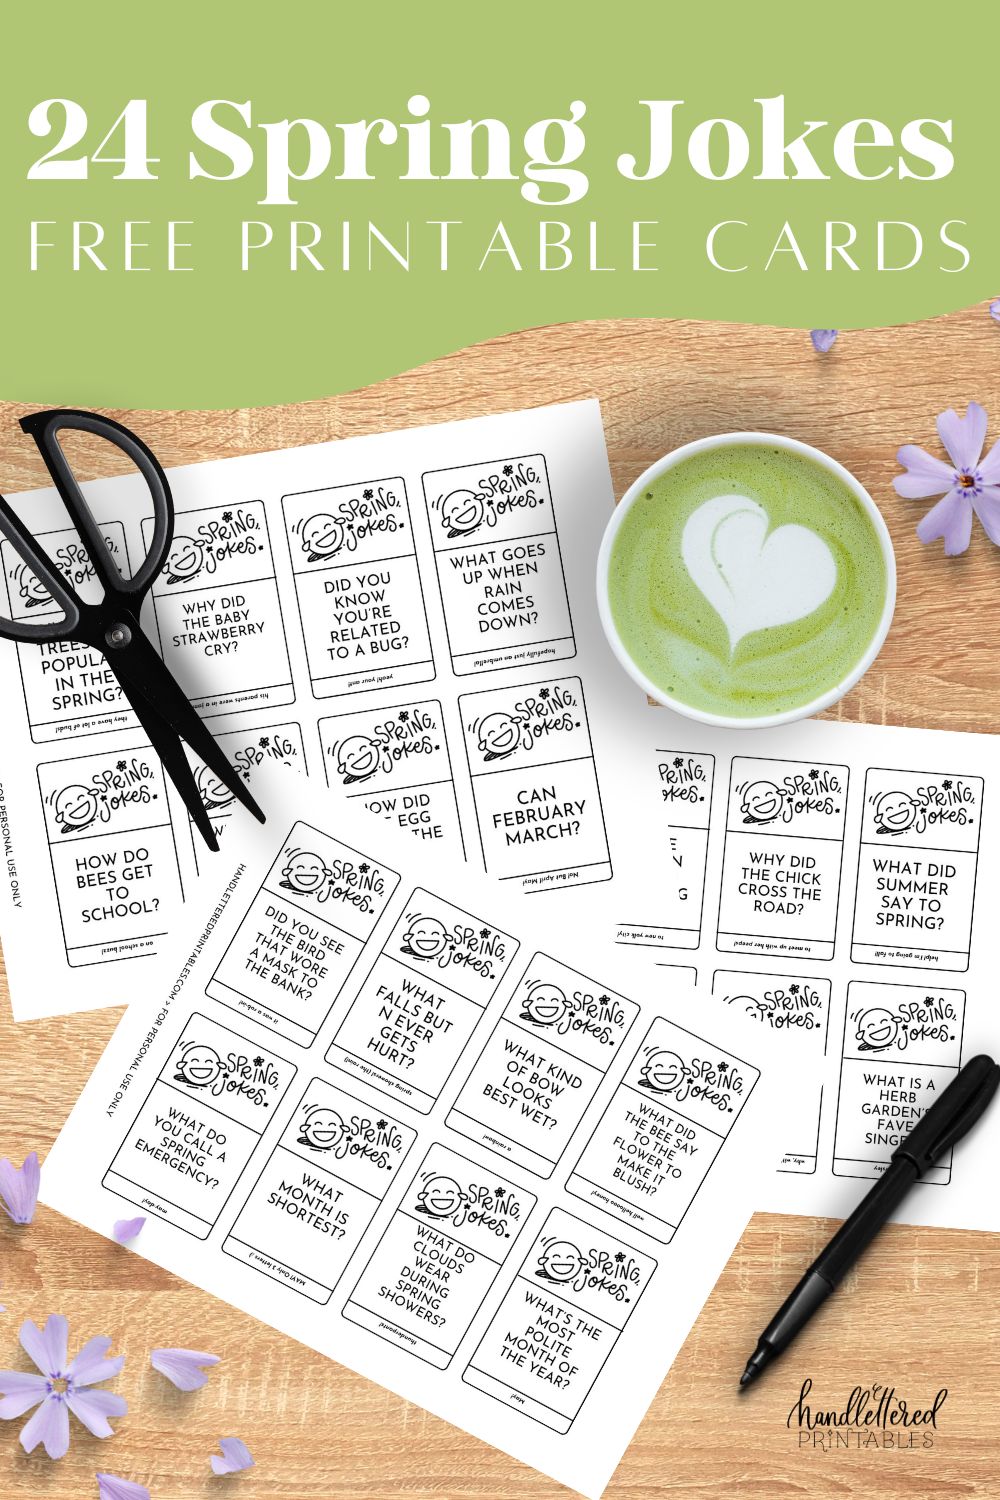 image of the black and white version of the spring jokes cards free printable printed on a wooden table with purple flowers, a matcha latte, pen and scissors. joke cards feature a hand lettered title and illustrated laughing emoji with the jokes.